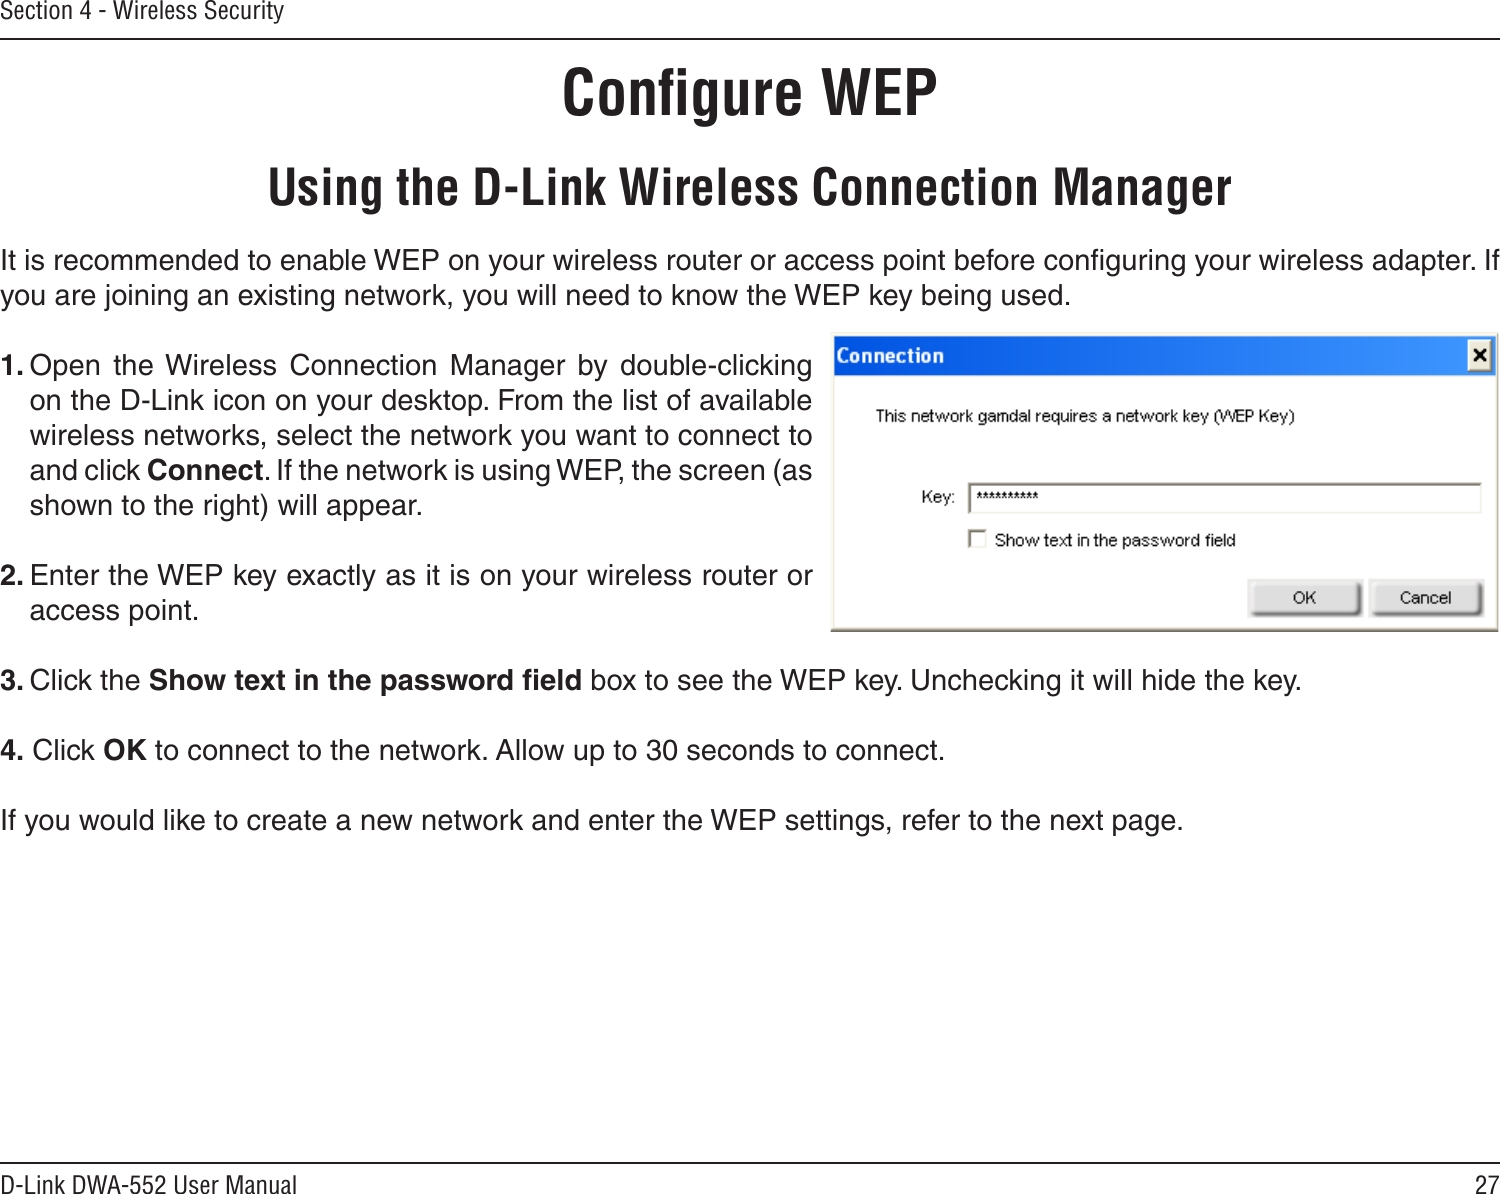 27D-Link DWA-552 User ManualSection 4 - Wireless SecurityConﬁgure WEPUsing the D-Link Wireless Connection ManagerIt is recommended to enable WEP on your wireless router or access point before conﬁguring your wireless adapter. If you are joining an existing network, you will need to know the WEP key being used.1. Open  the Wireless  Connection  Manager  by  double-clicking on the D-Link icon on your desktop. From the list of available wireless networks, select the network you want to connect to and click Connect. If the network is using WEP, the screen (as shown to the right) will appear. 2. Enter the WEP key exactly as it is on your wireless router or access point.3. Click the Show text in the password ﬁeld box to see the WEP key. Unchecking it will hide the key.4. Click OK to connect to the network. Allow up to 30 seconds to connect.If you would like to create a new network and enter the WEP settings, refer to the next page.